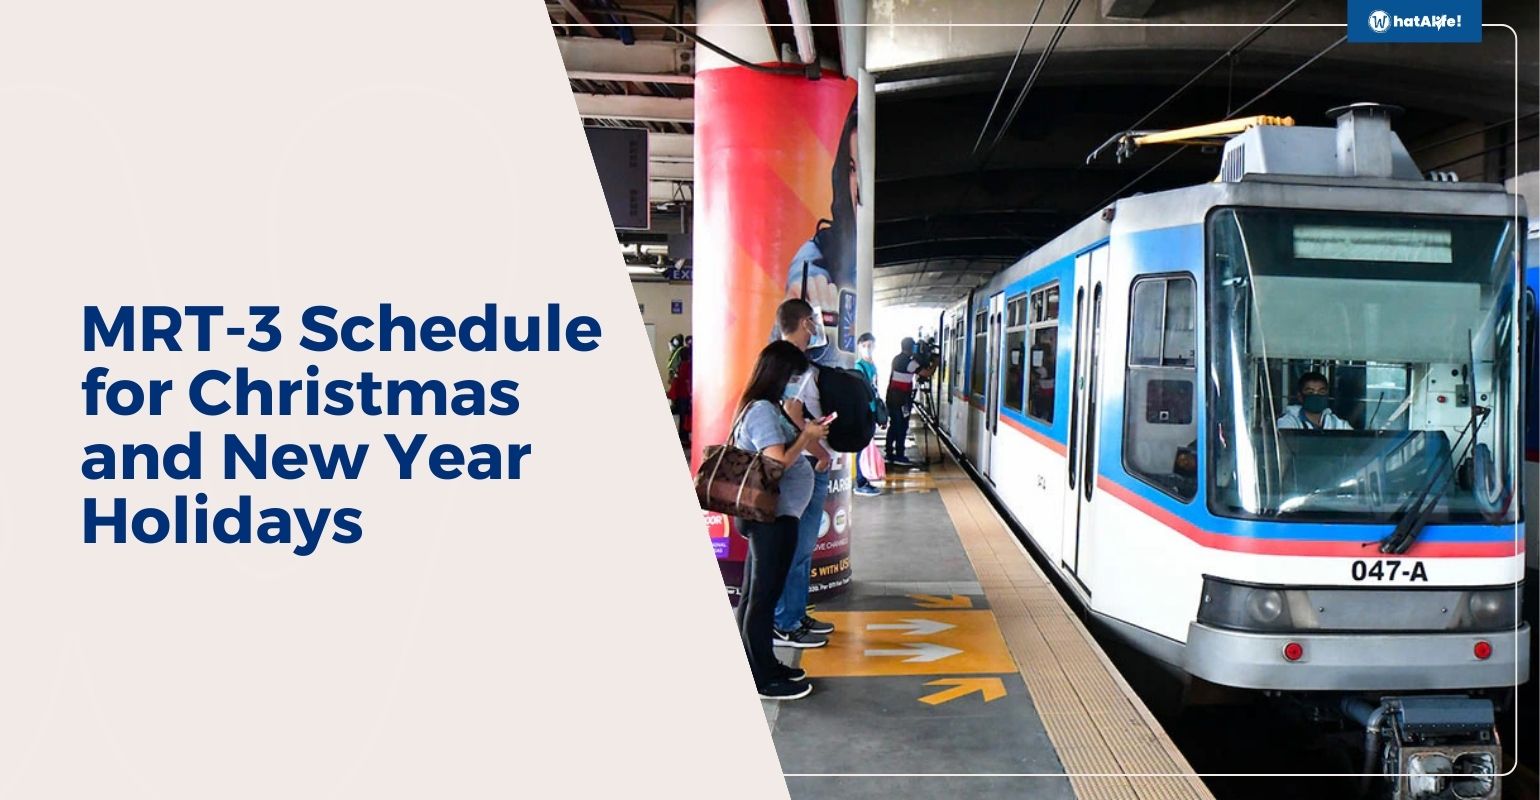 MRT-3 Schedule for Christmas and New Year Holidays 